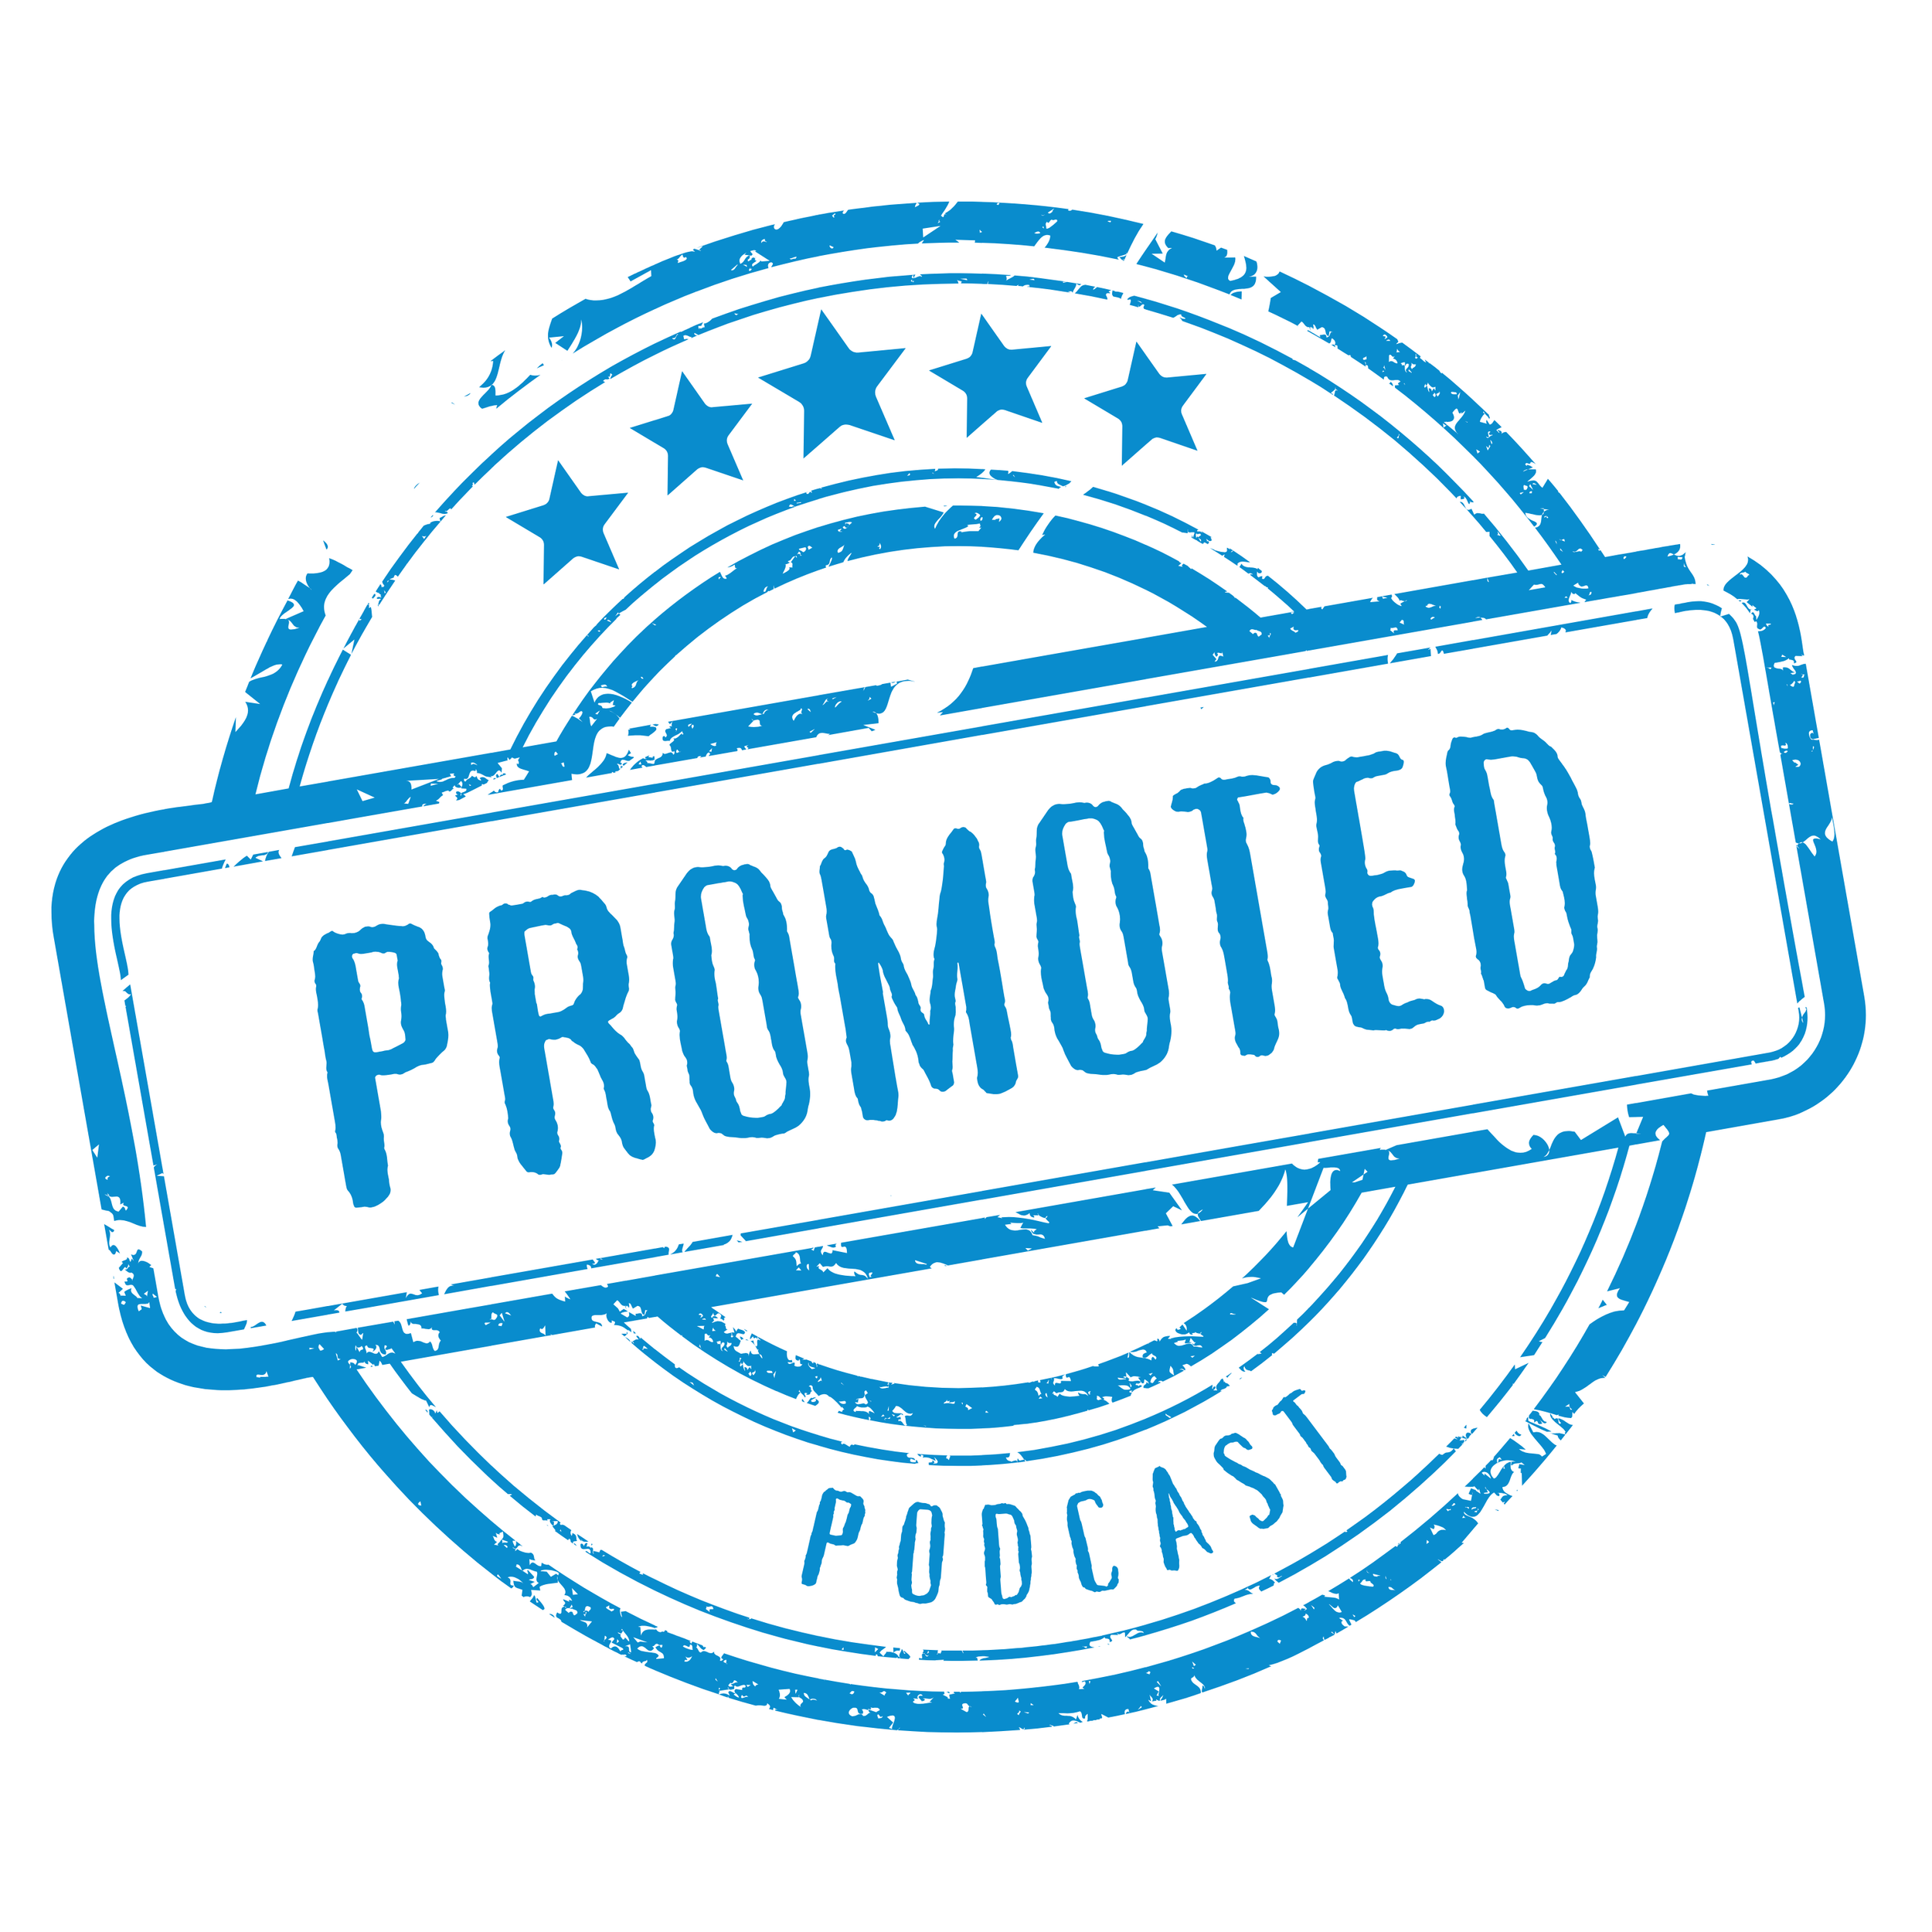 Promoted Podcast by Felicity Furey